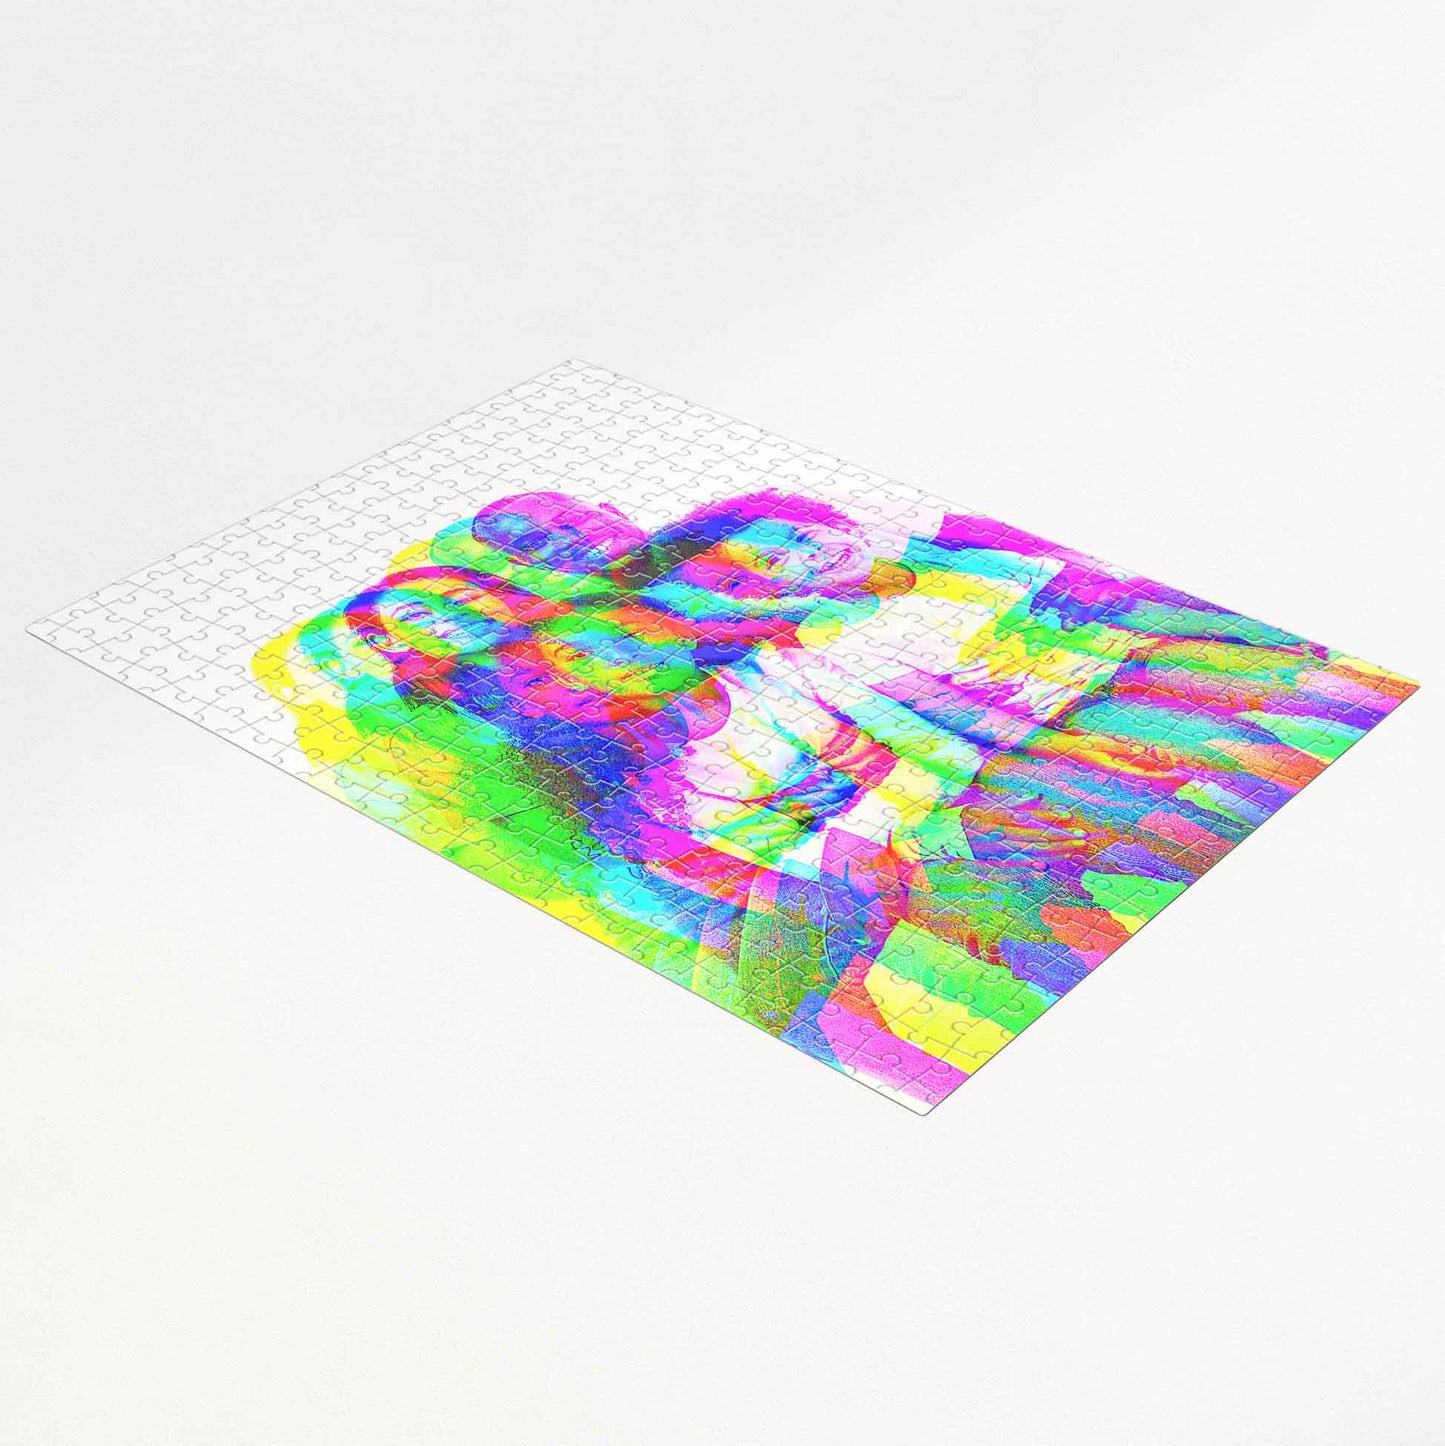 Get ready for an immersive puzzle experience with a Personalised Anaglyph 3D Jigsaw Puzzle. Its designer touch and minimalist style make it an ideal gift for your loved ones